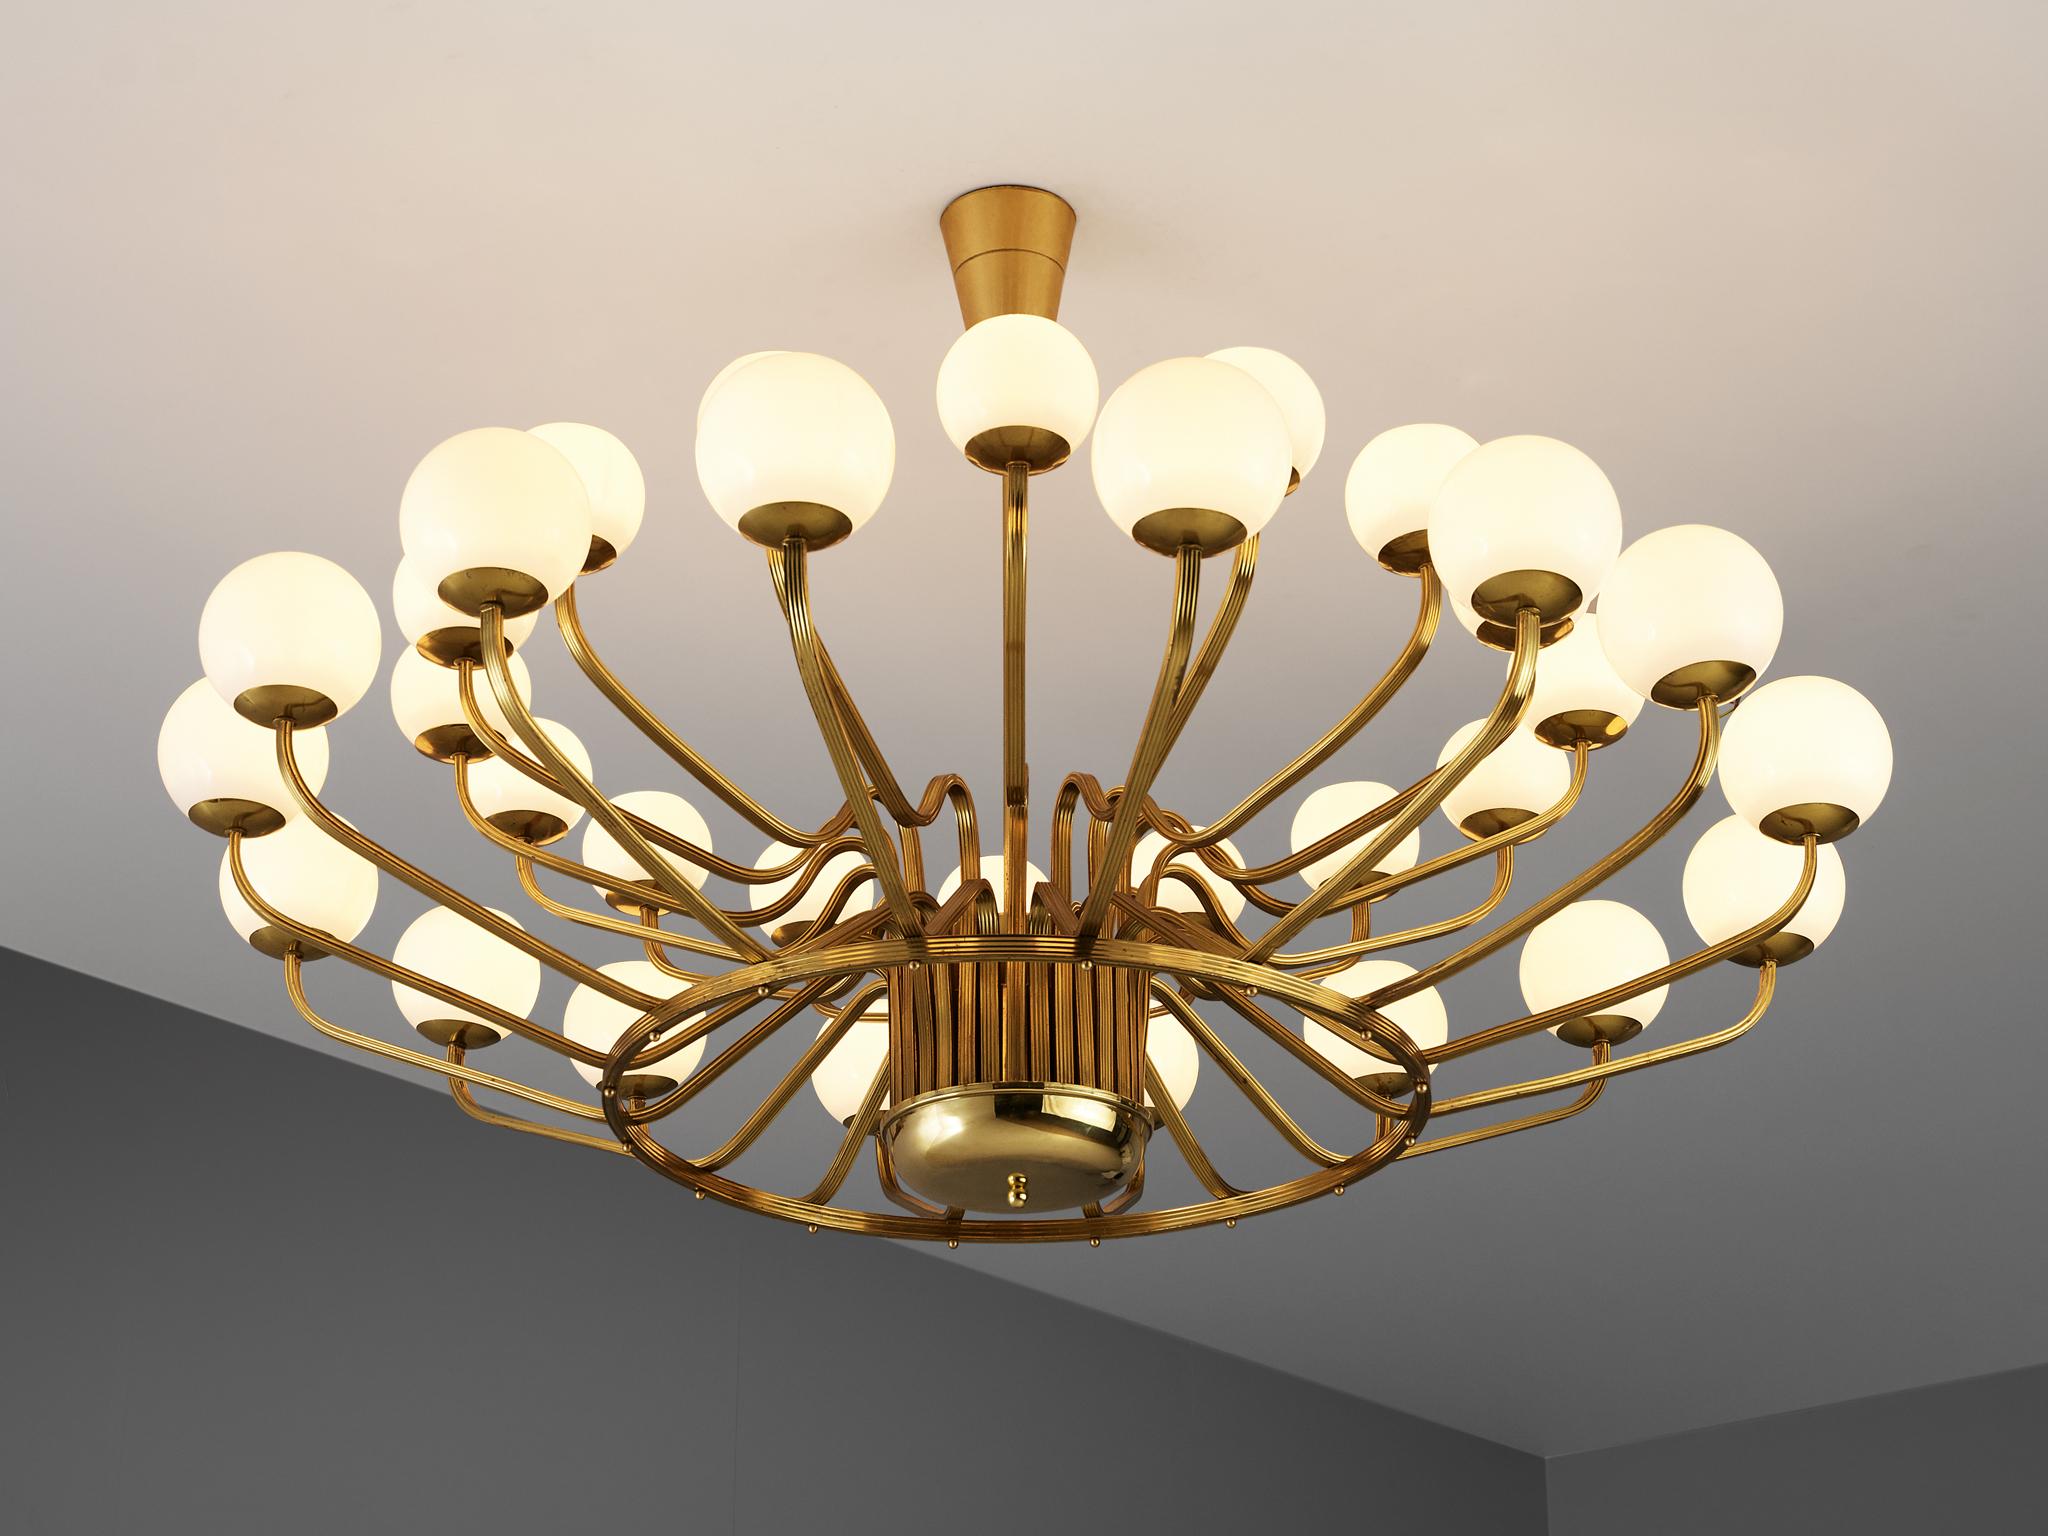 Large chandelier, brass, glass, Europe, 1970s

Large chandelier with brass fixtures and glass spheres. The chandelier with a detailed brass frame holds two circular rows of lights on different heights. This arrangement creates a grand, luxurious